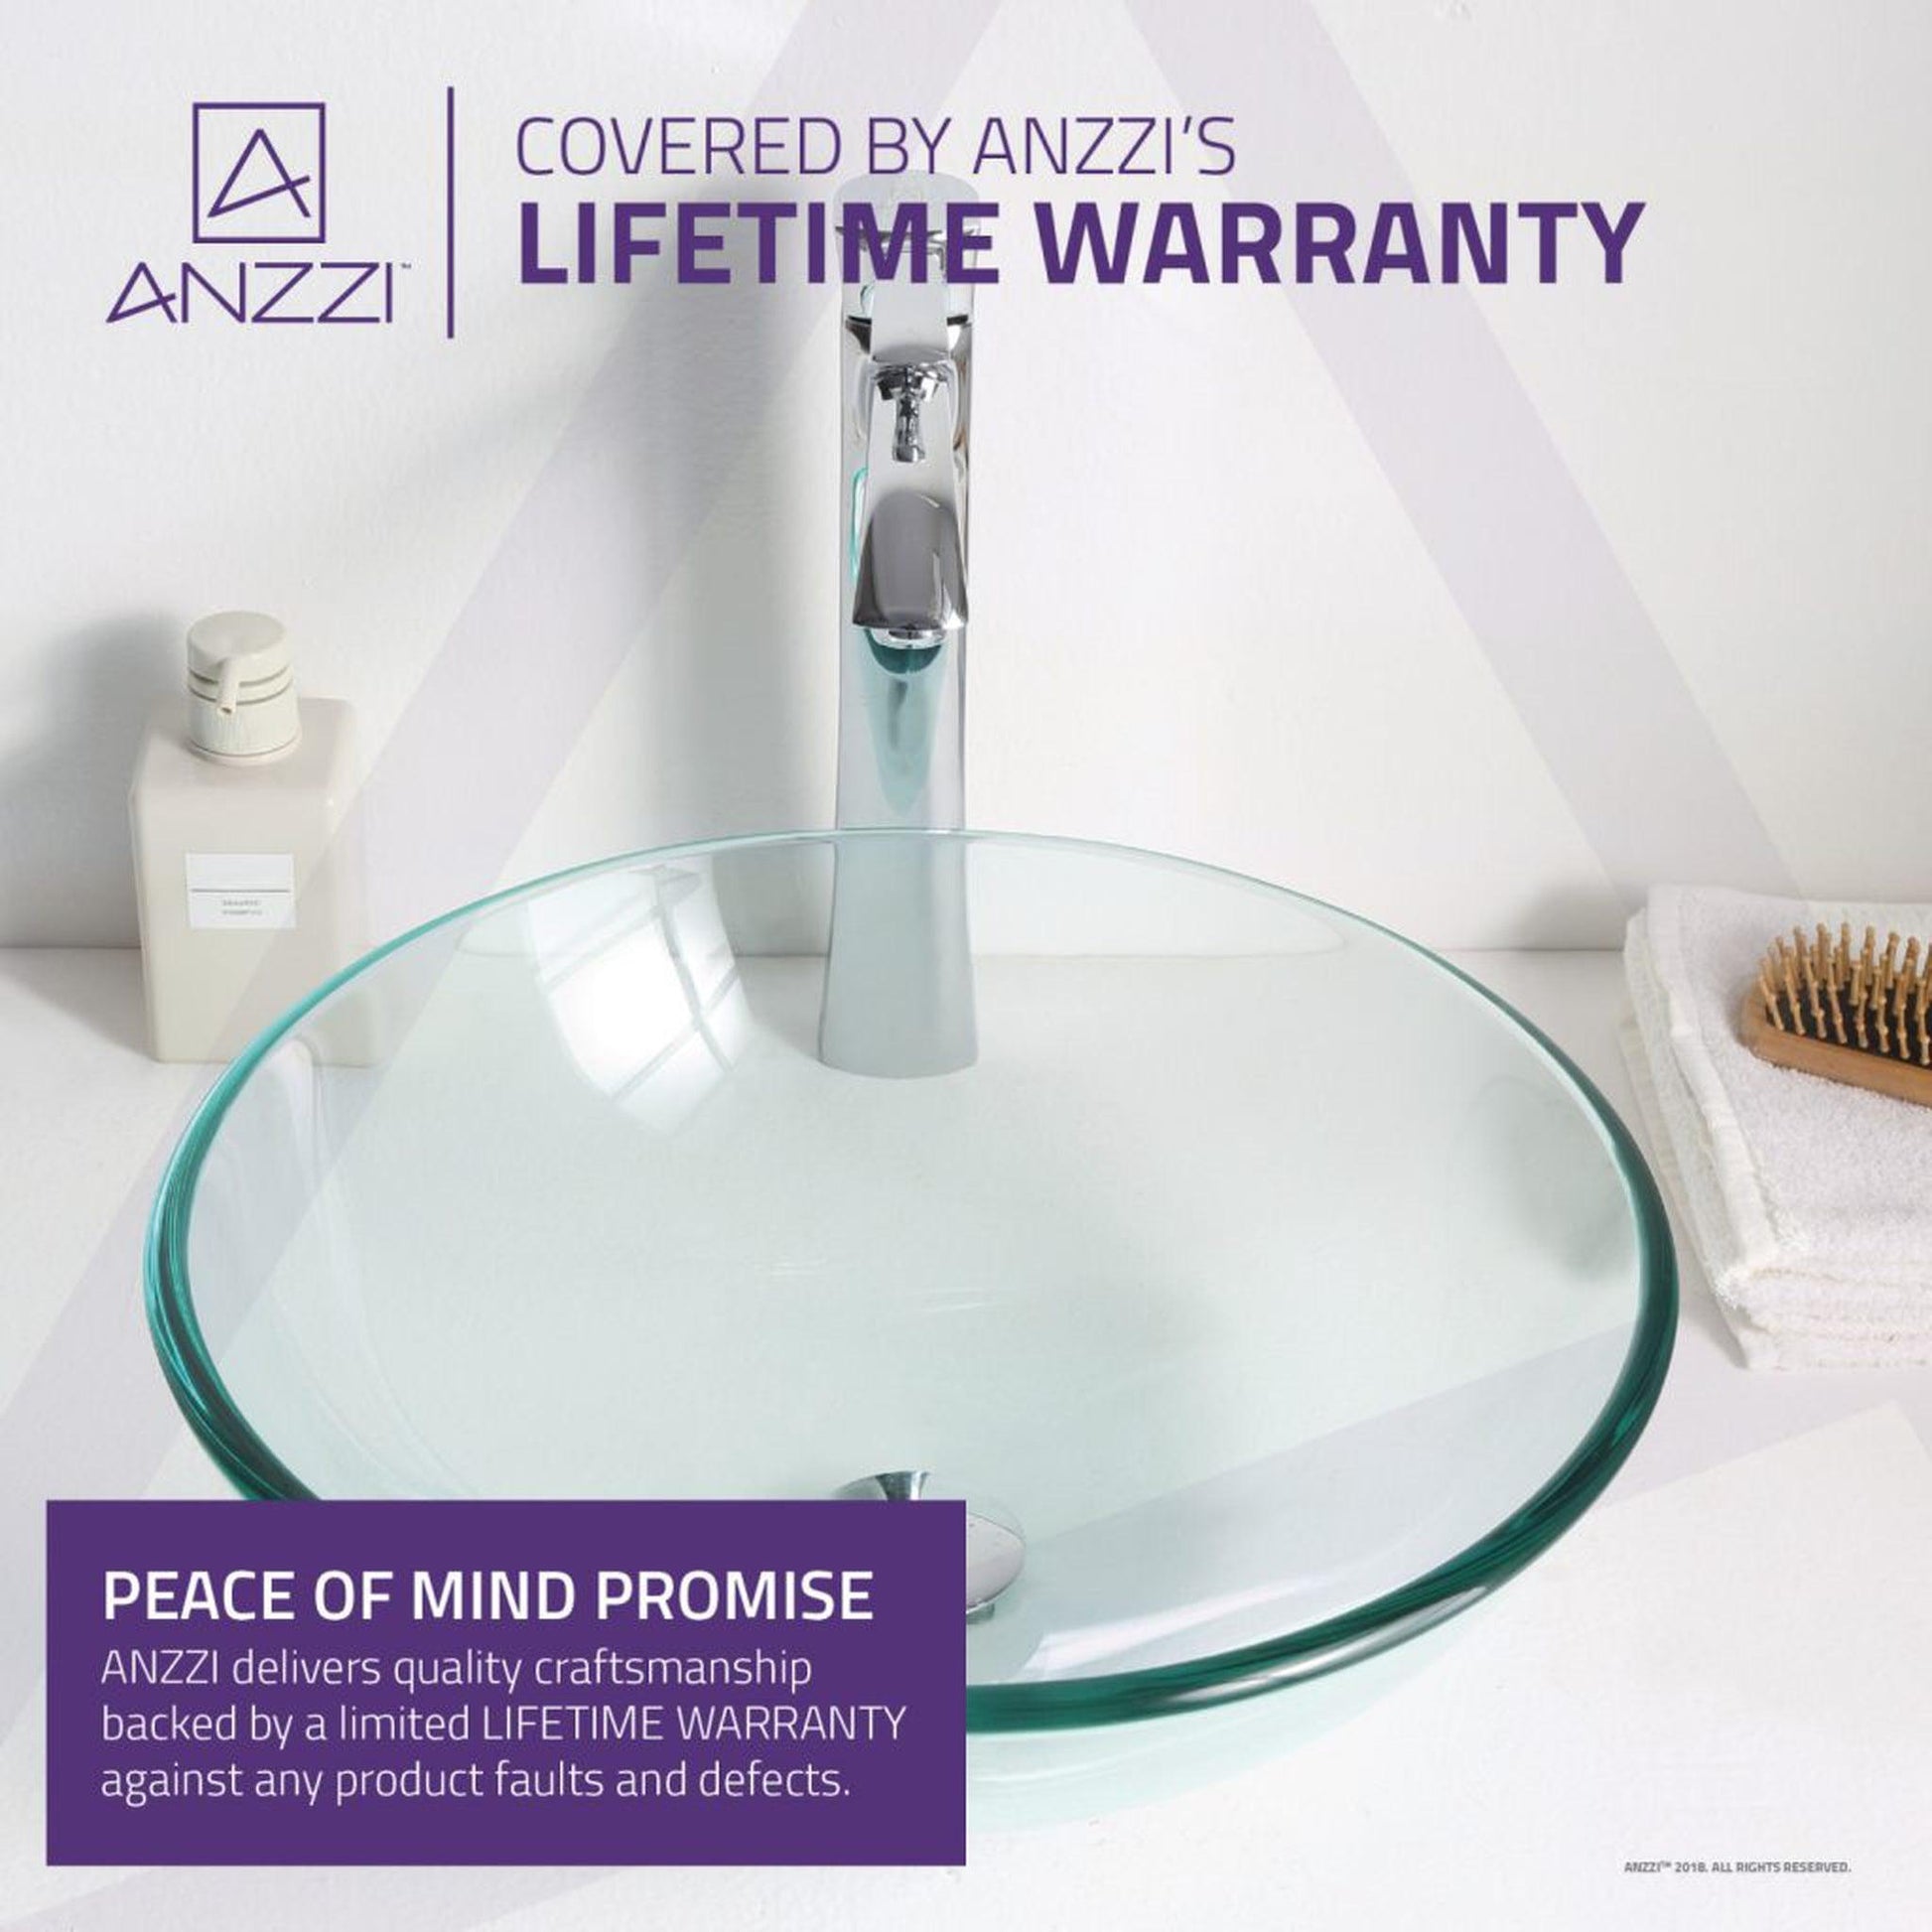 ANZZI Mythic Series 17" x 17" Round Lustrous Clear Deco-Glass Vessel Sink With Polished Chrome Pop-Up Drain